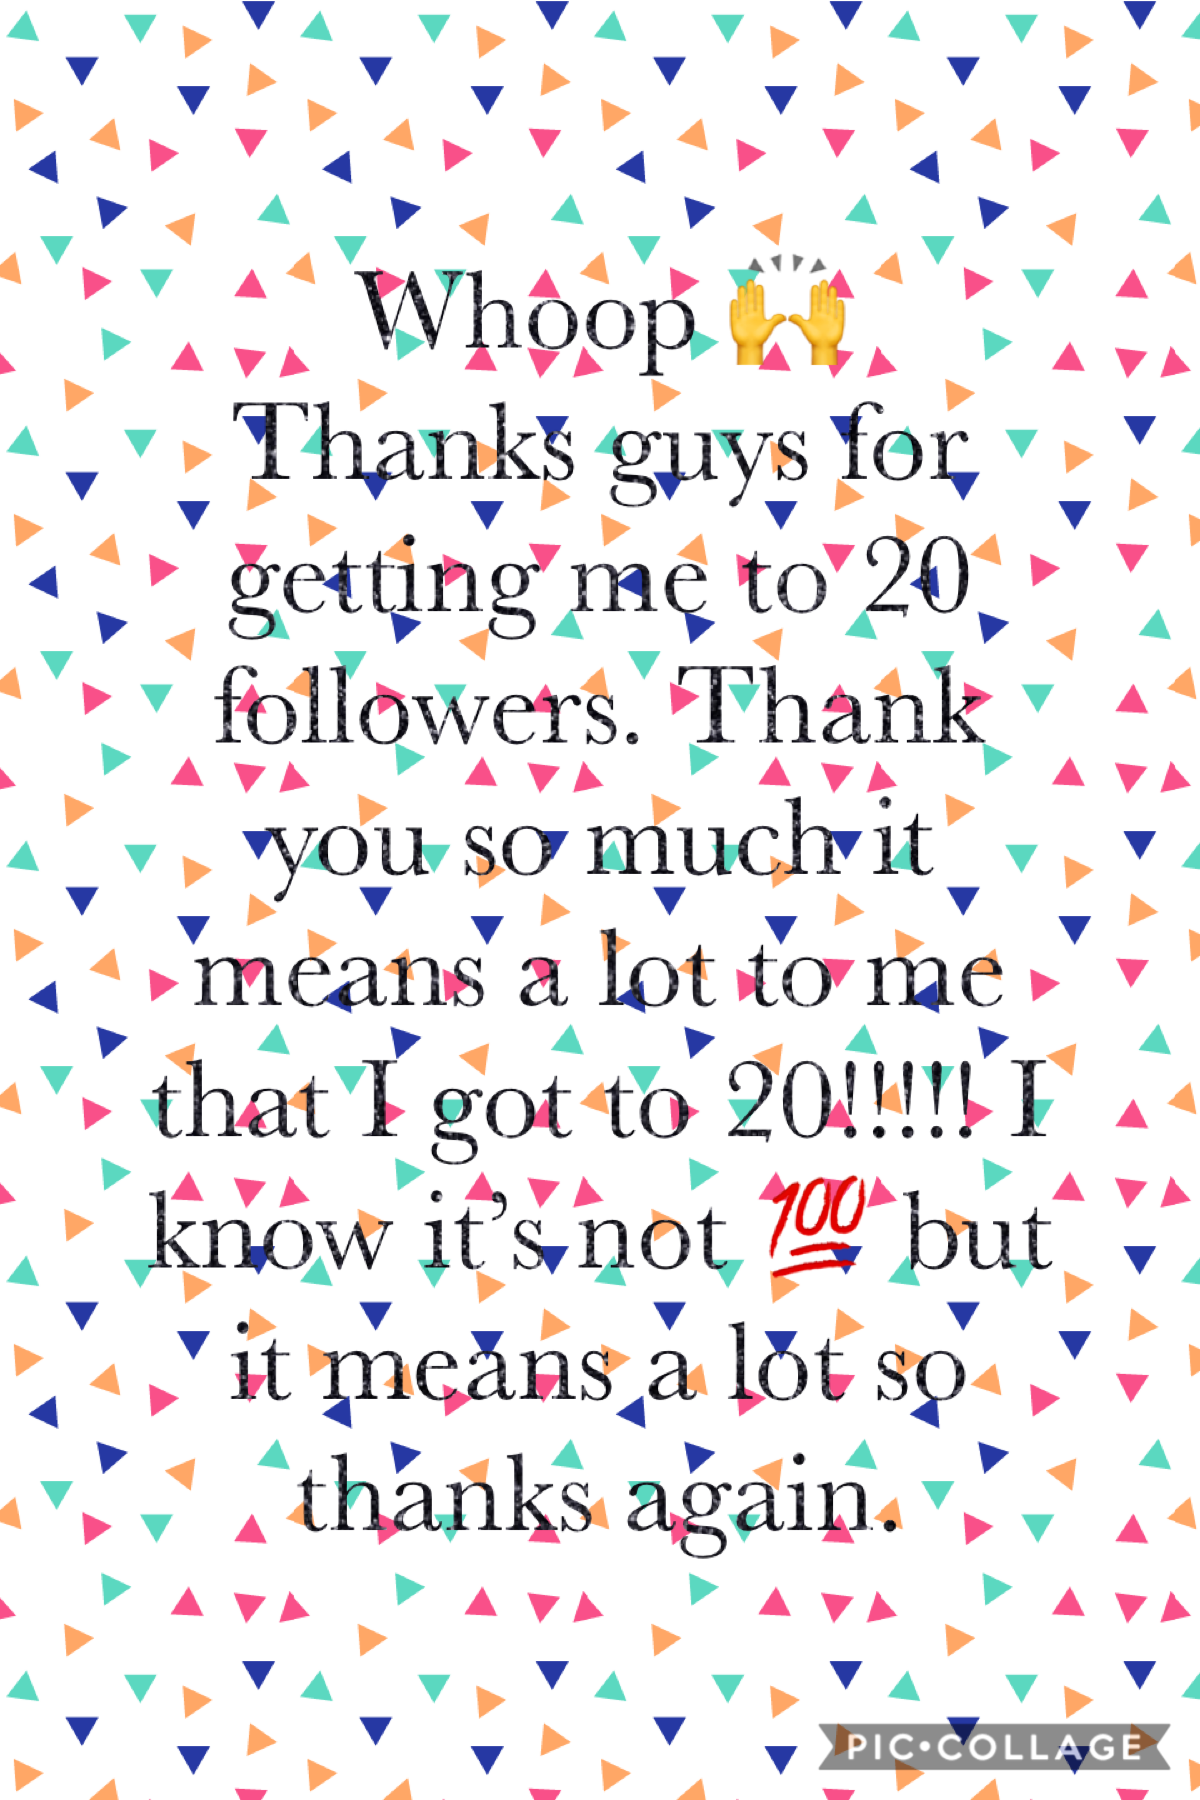 🙌tap🙌
Thanks for the 20!!! can we go to 💯?????? 🤗🤗🤩🤩🤩 it means a lot to me. 